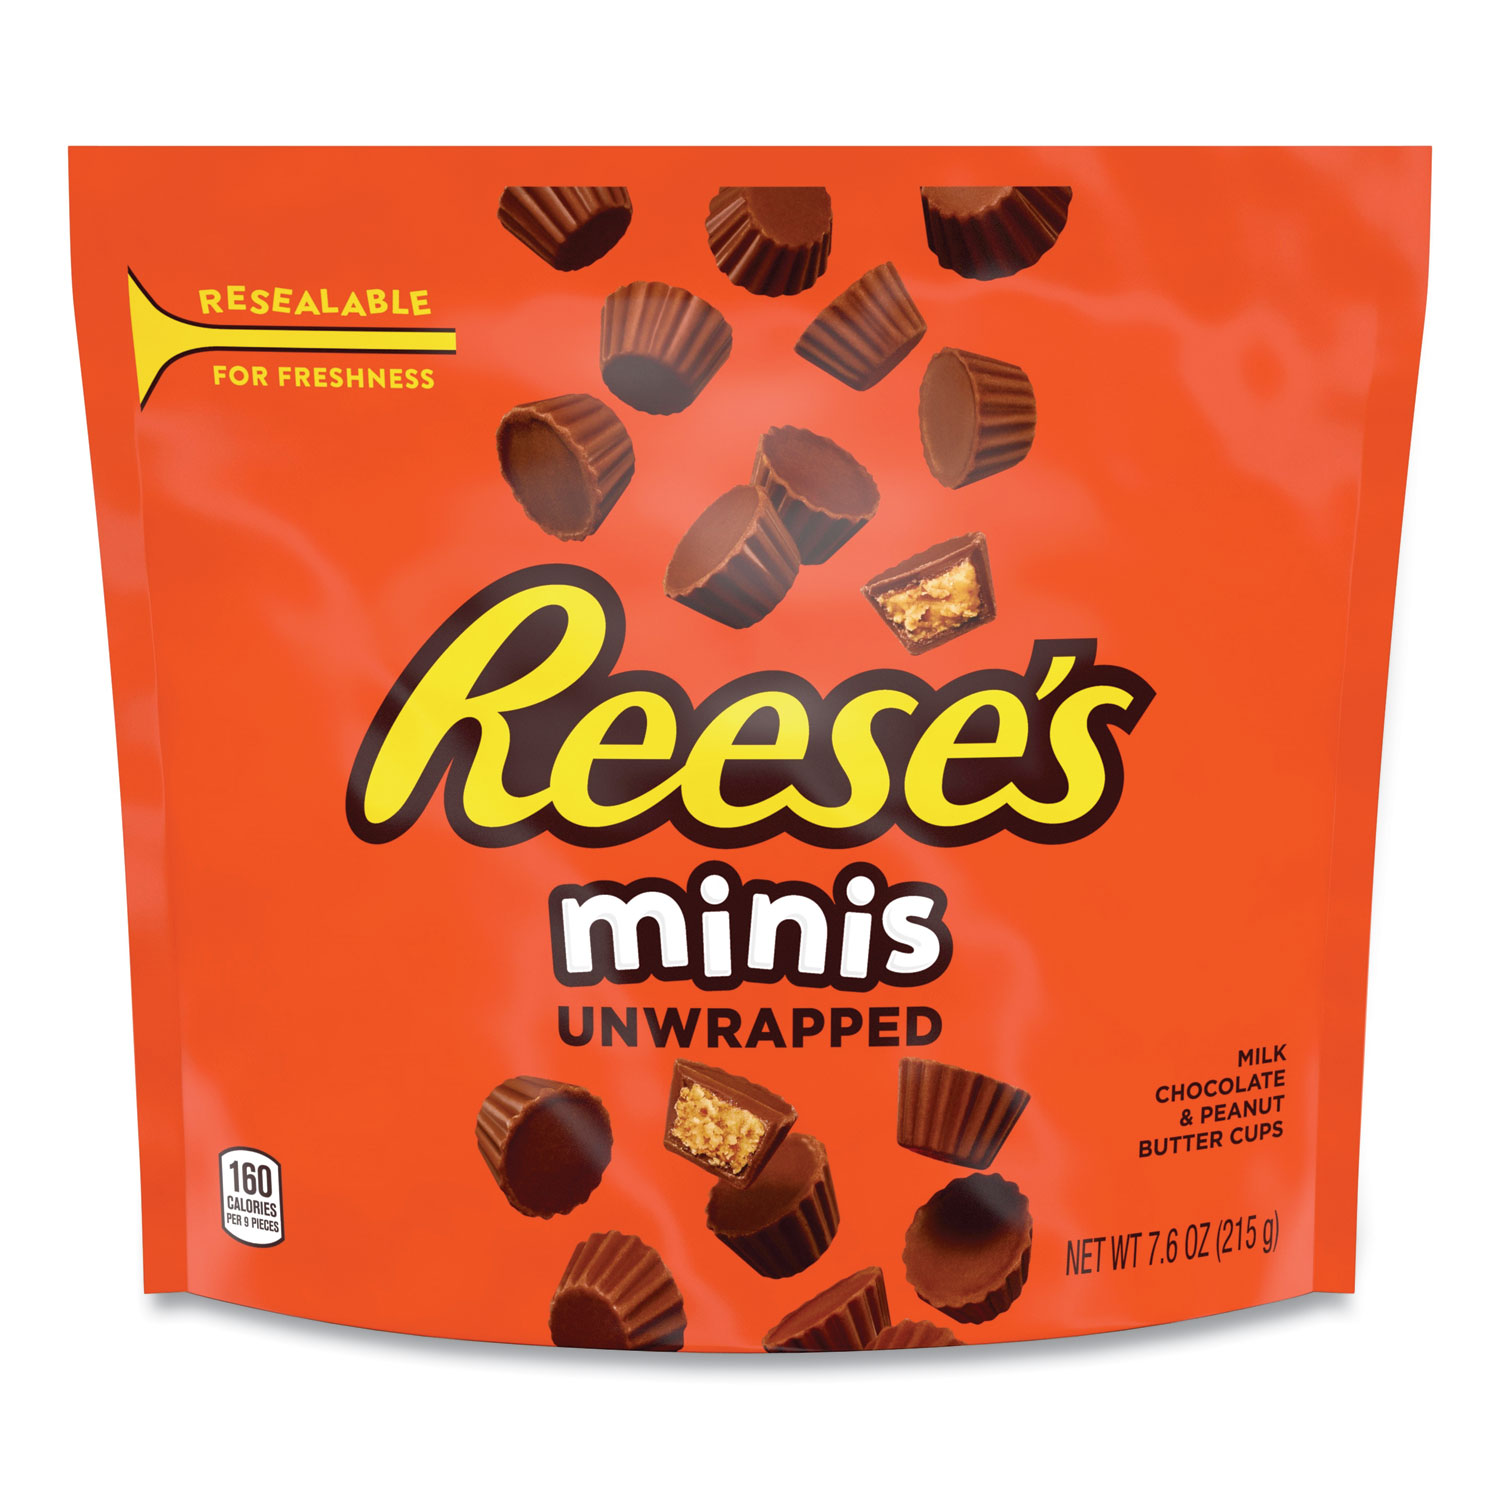  Reese's 47056 Peanut Butter Cups Unwrapped Miniatures, Resealable Bag, 7.6 oz Bag, 4/Pack, Free Delivery in 1-4 Business Days (GRR24600408) 